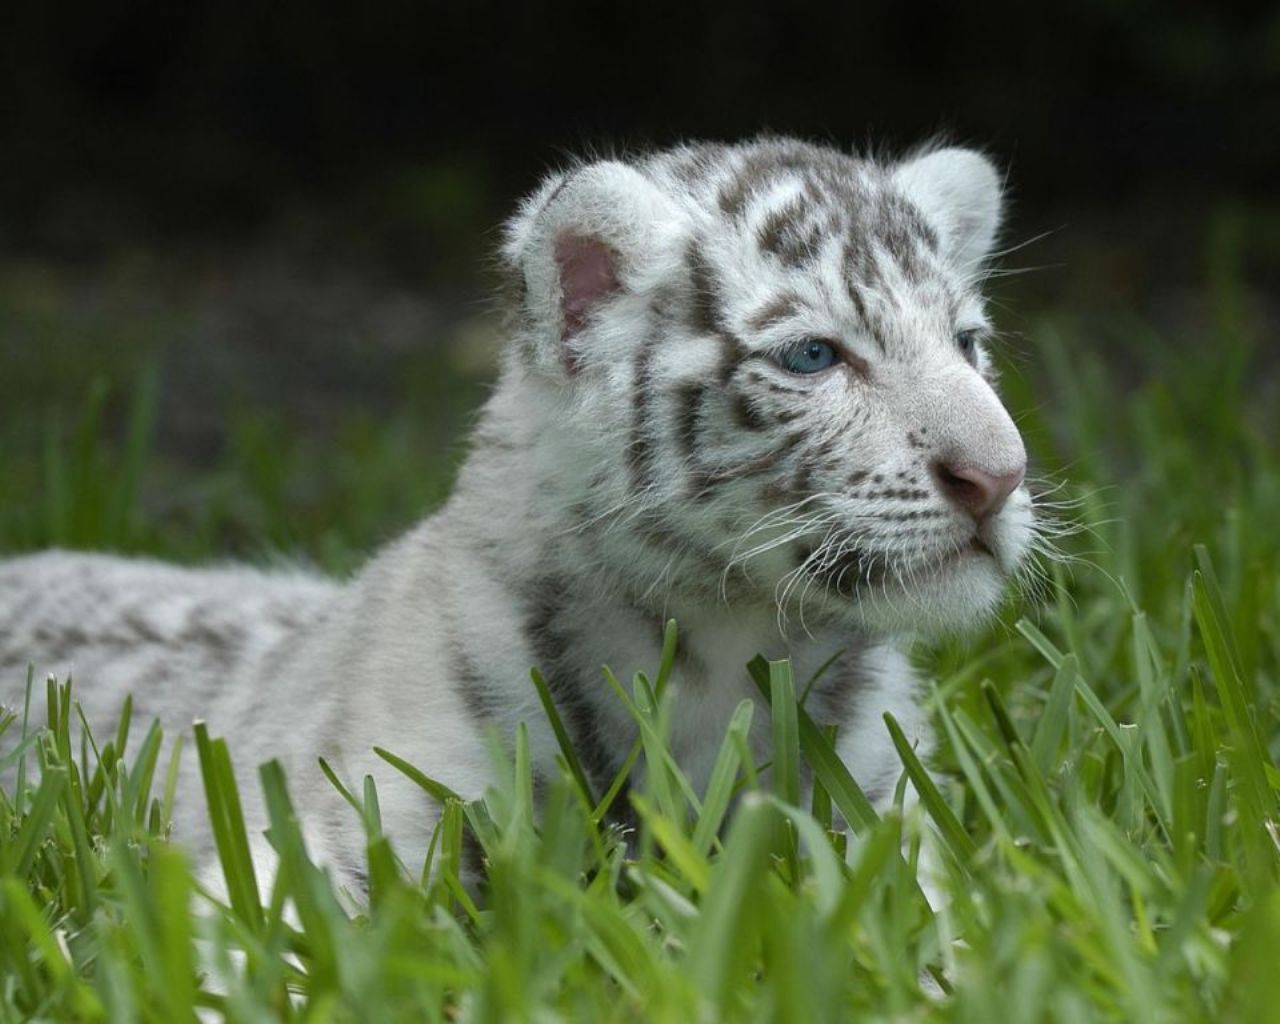 White Tigers Cubs Wallpaper images 1280x1024